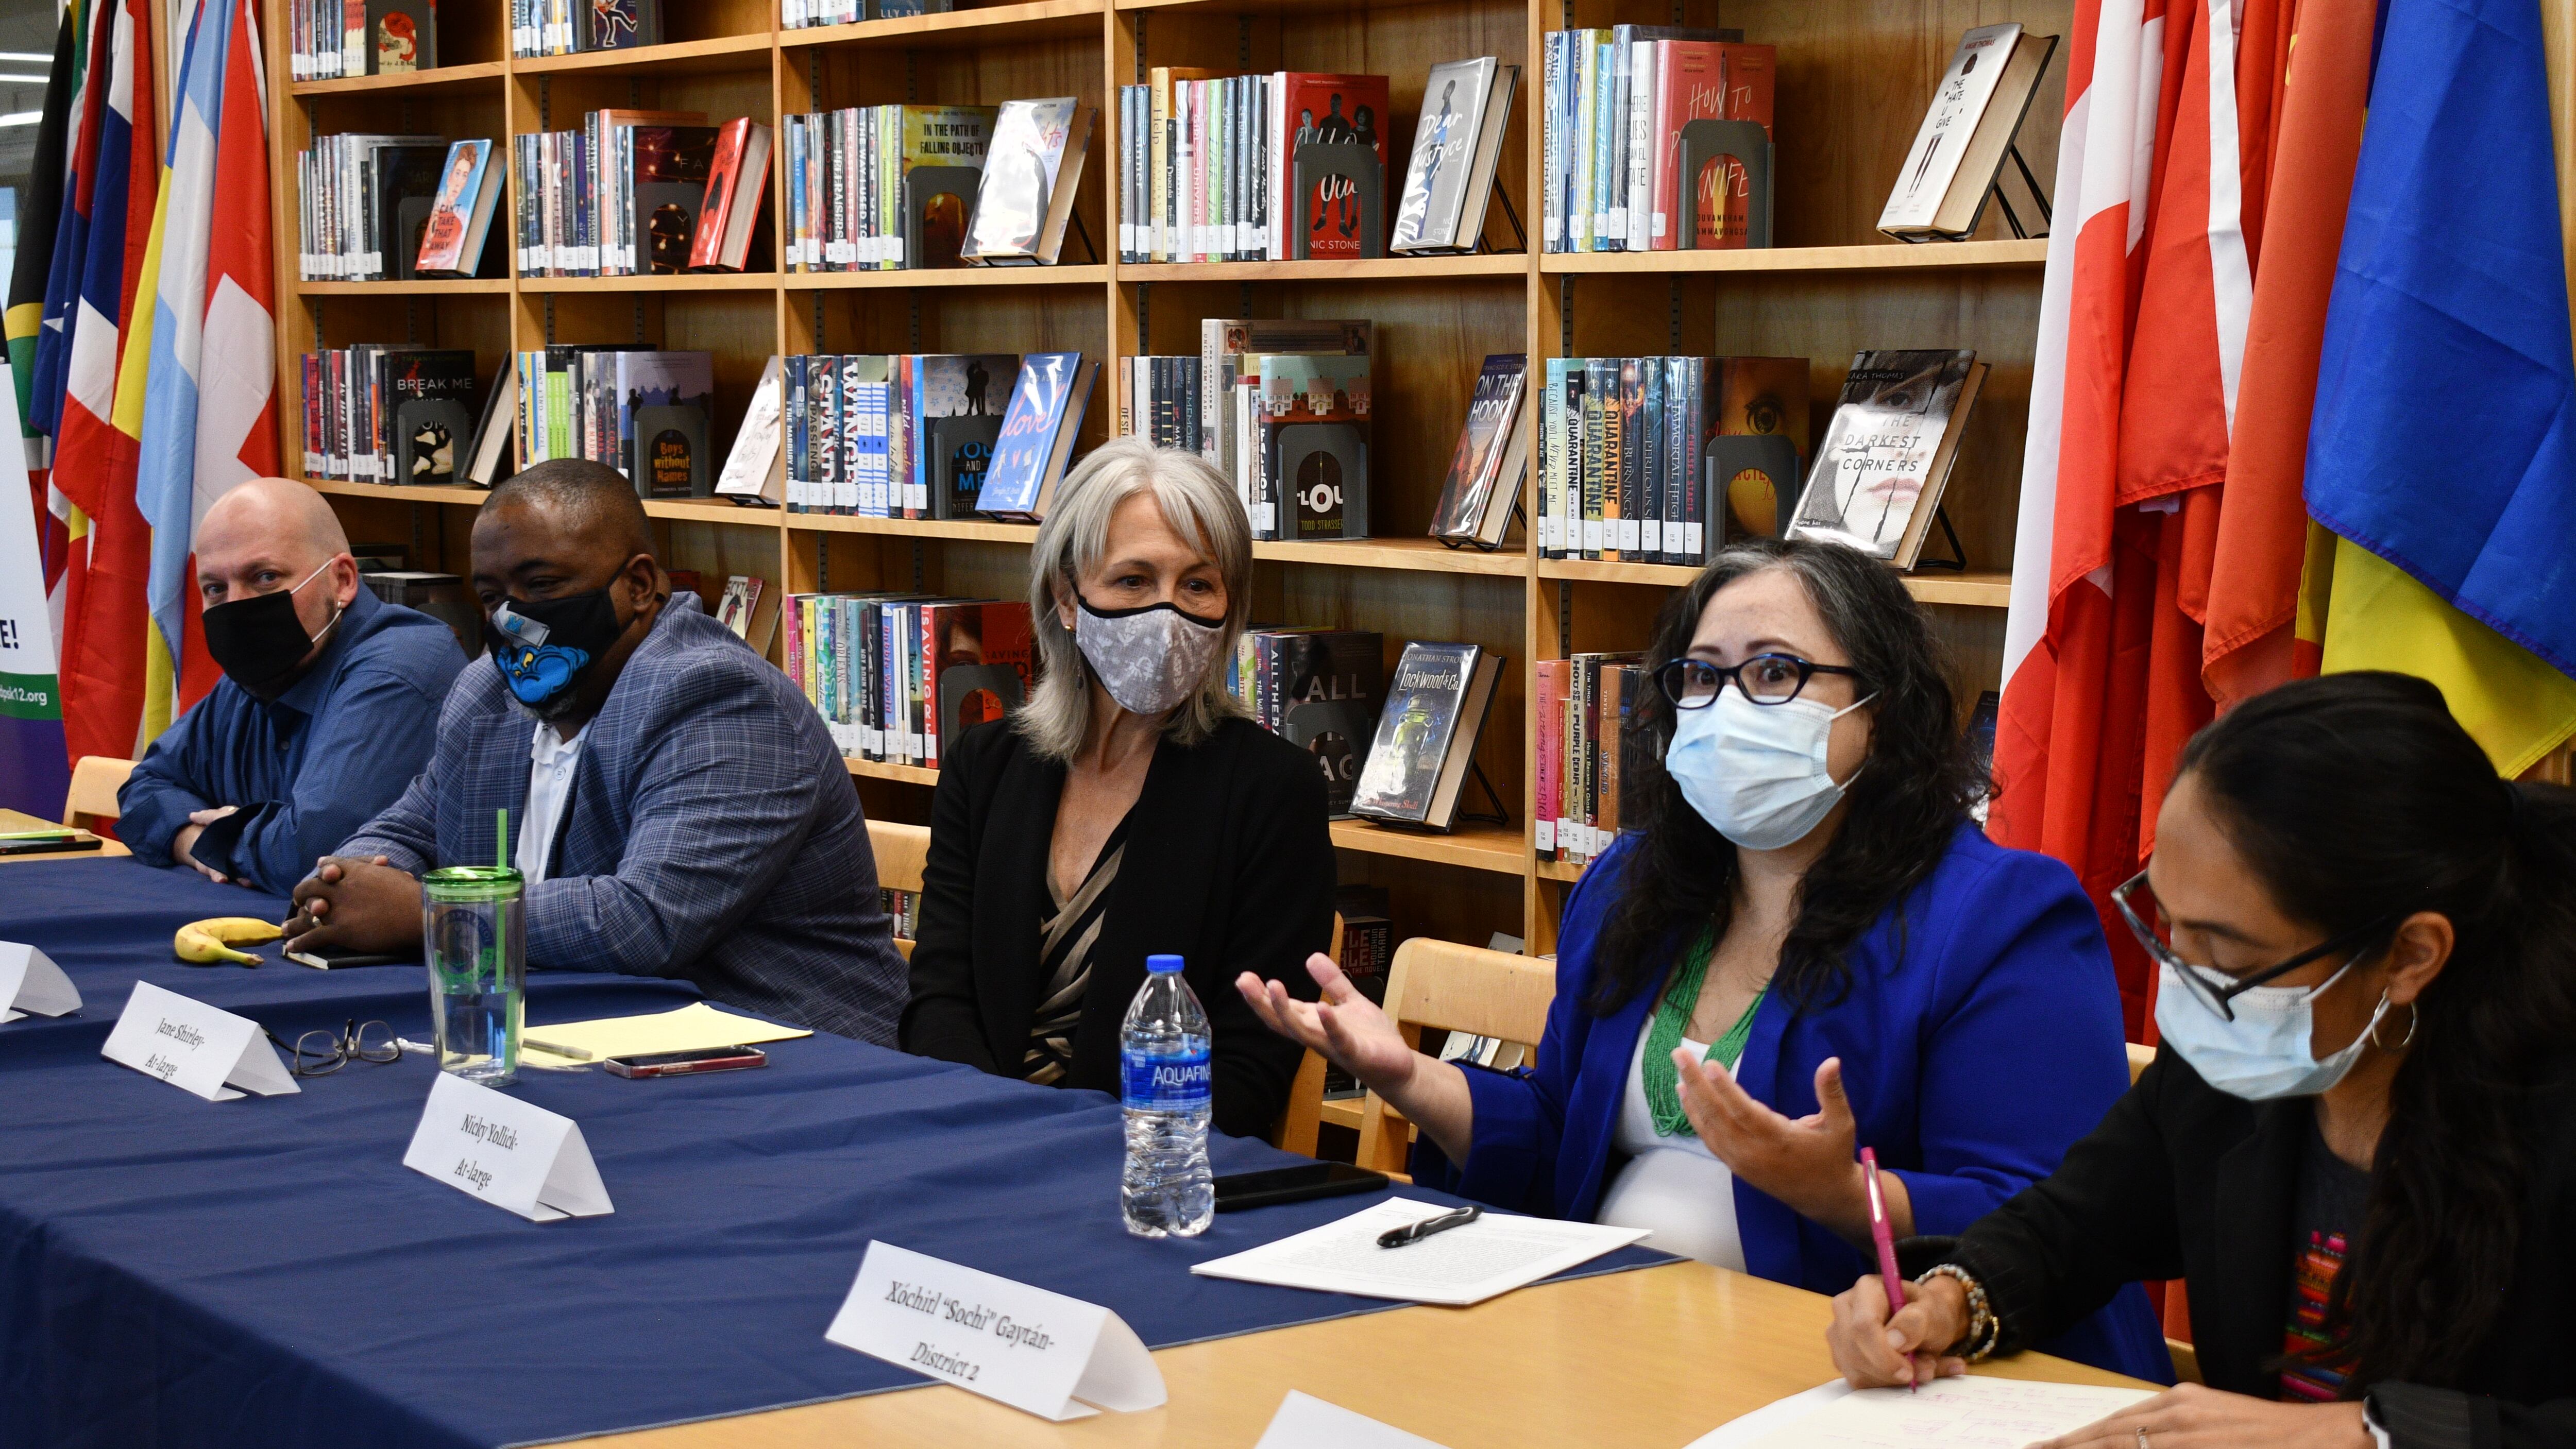 Five Denver school board candidates sit at a table in a high school library during a candidate forum. The candidates are wearing masks.